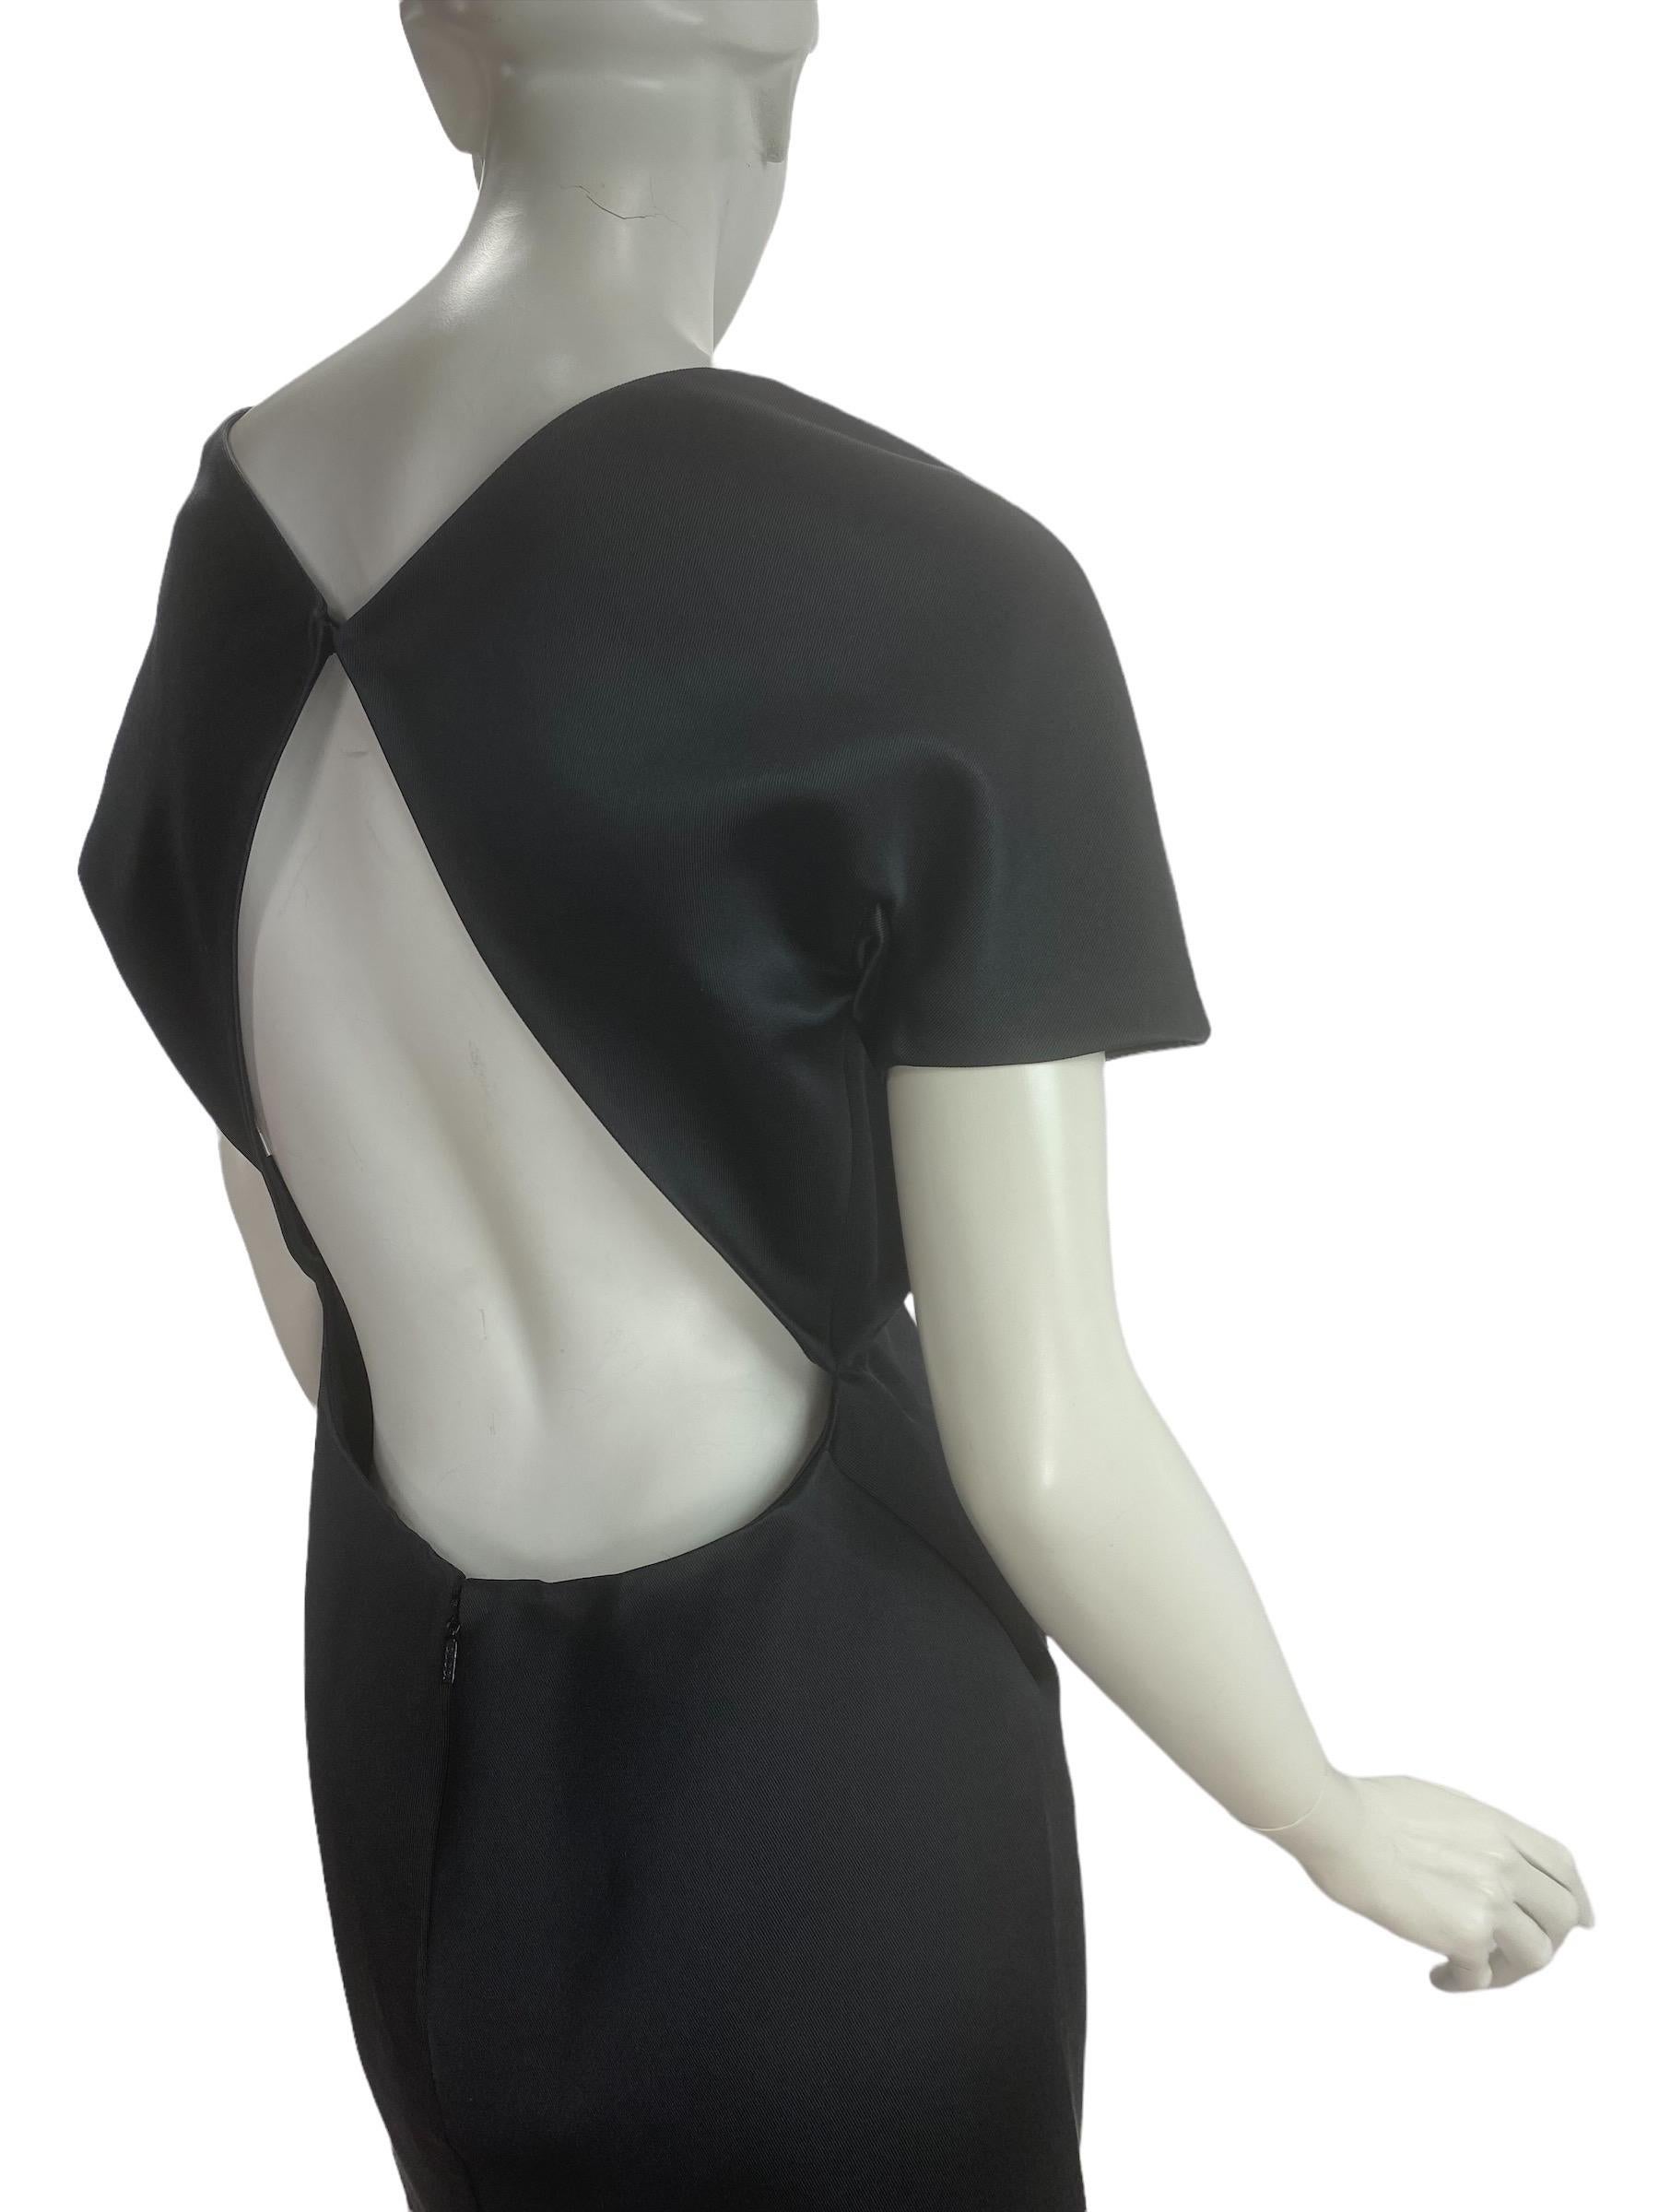 Women's 2001 Ad Campaign Tom Ford for Gucci Black Backless Dress Size Italian 44 For Sale